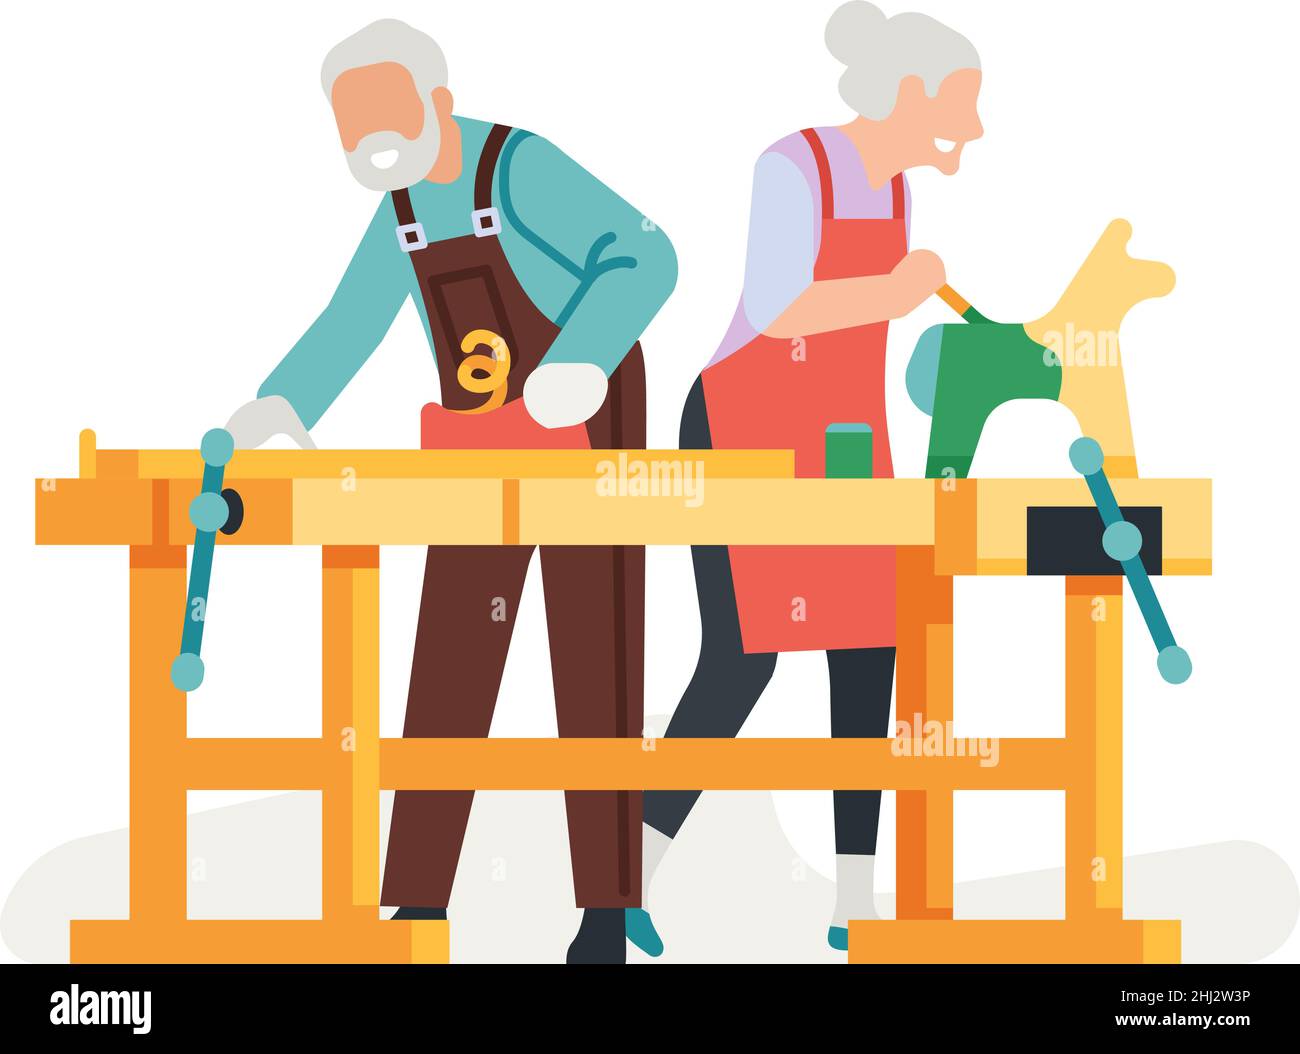 Seniors woodworking. Old people making wood toys. Elderly activity Stock Vector